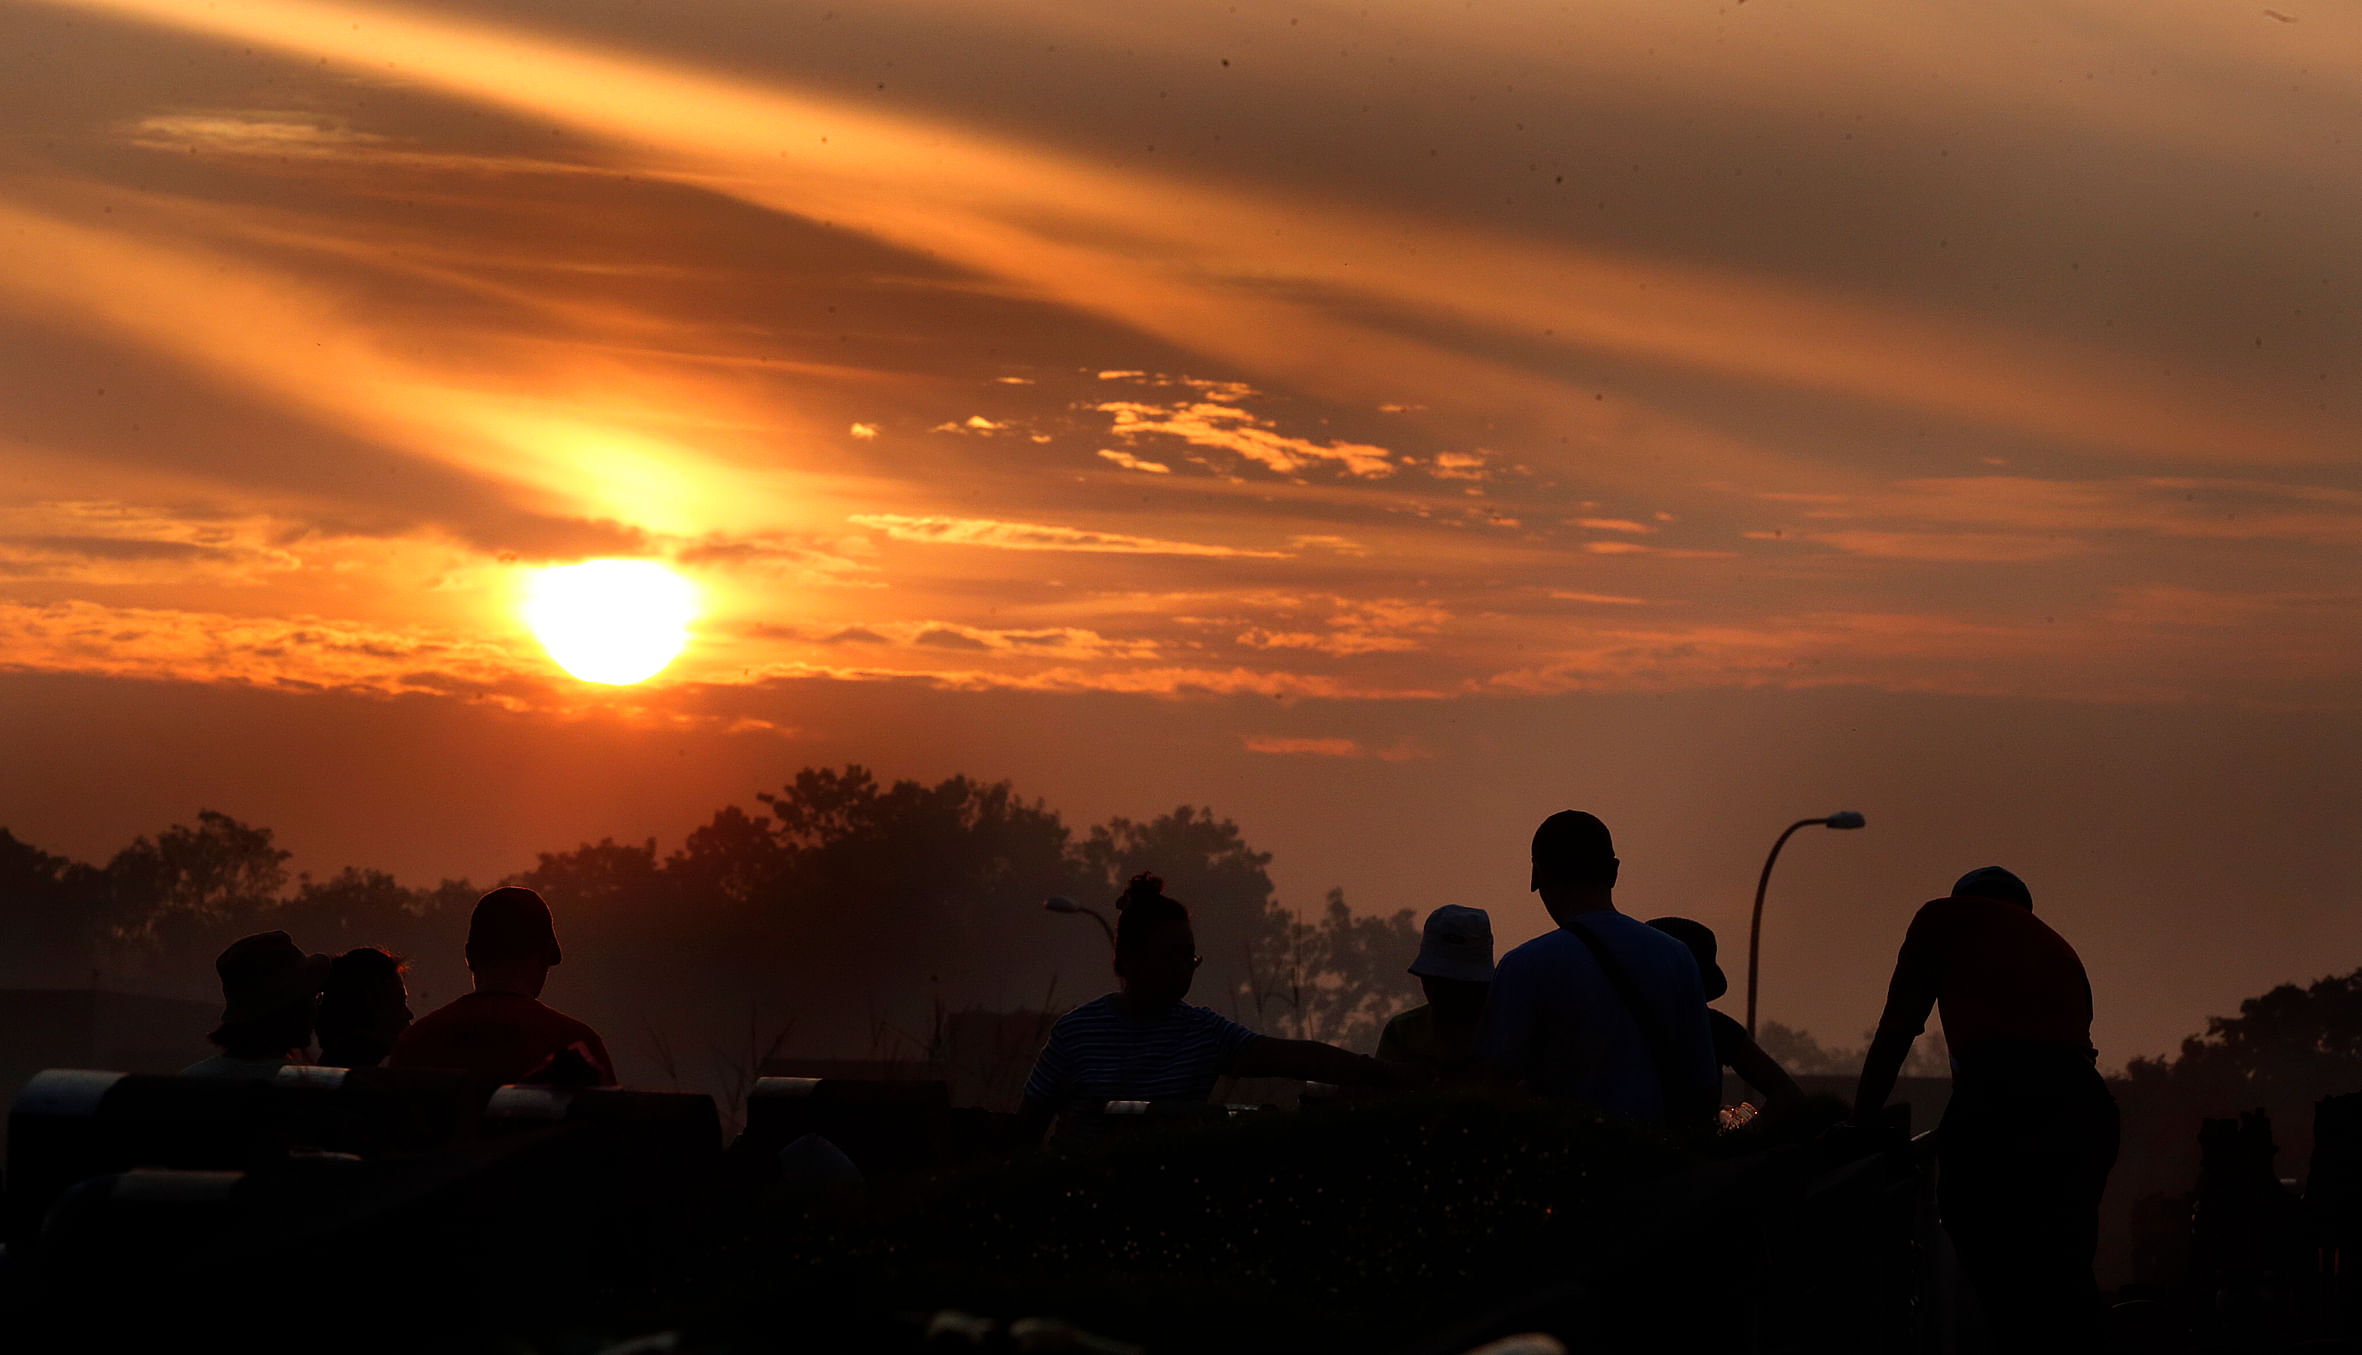 Families paying their respects at Choa Chu Kang Cemetery at dawn during a Qing Ming Festival, which is an annual “tomb sweeping” day. PHOTO: ST FILE